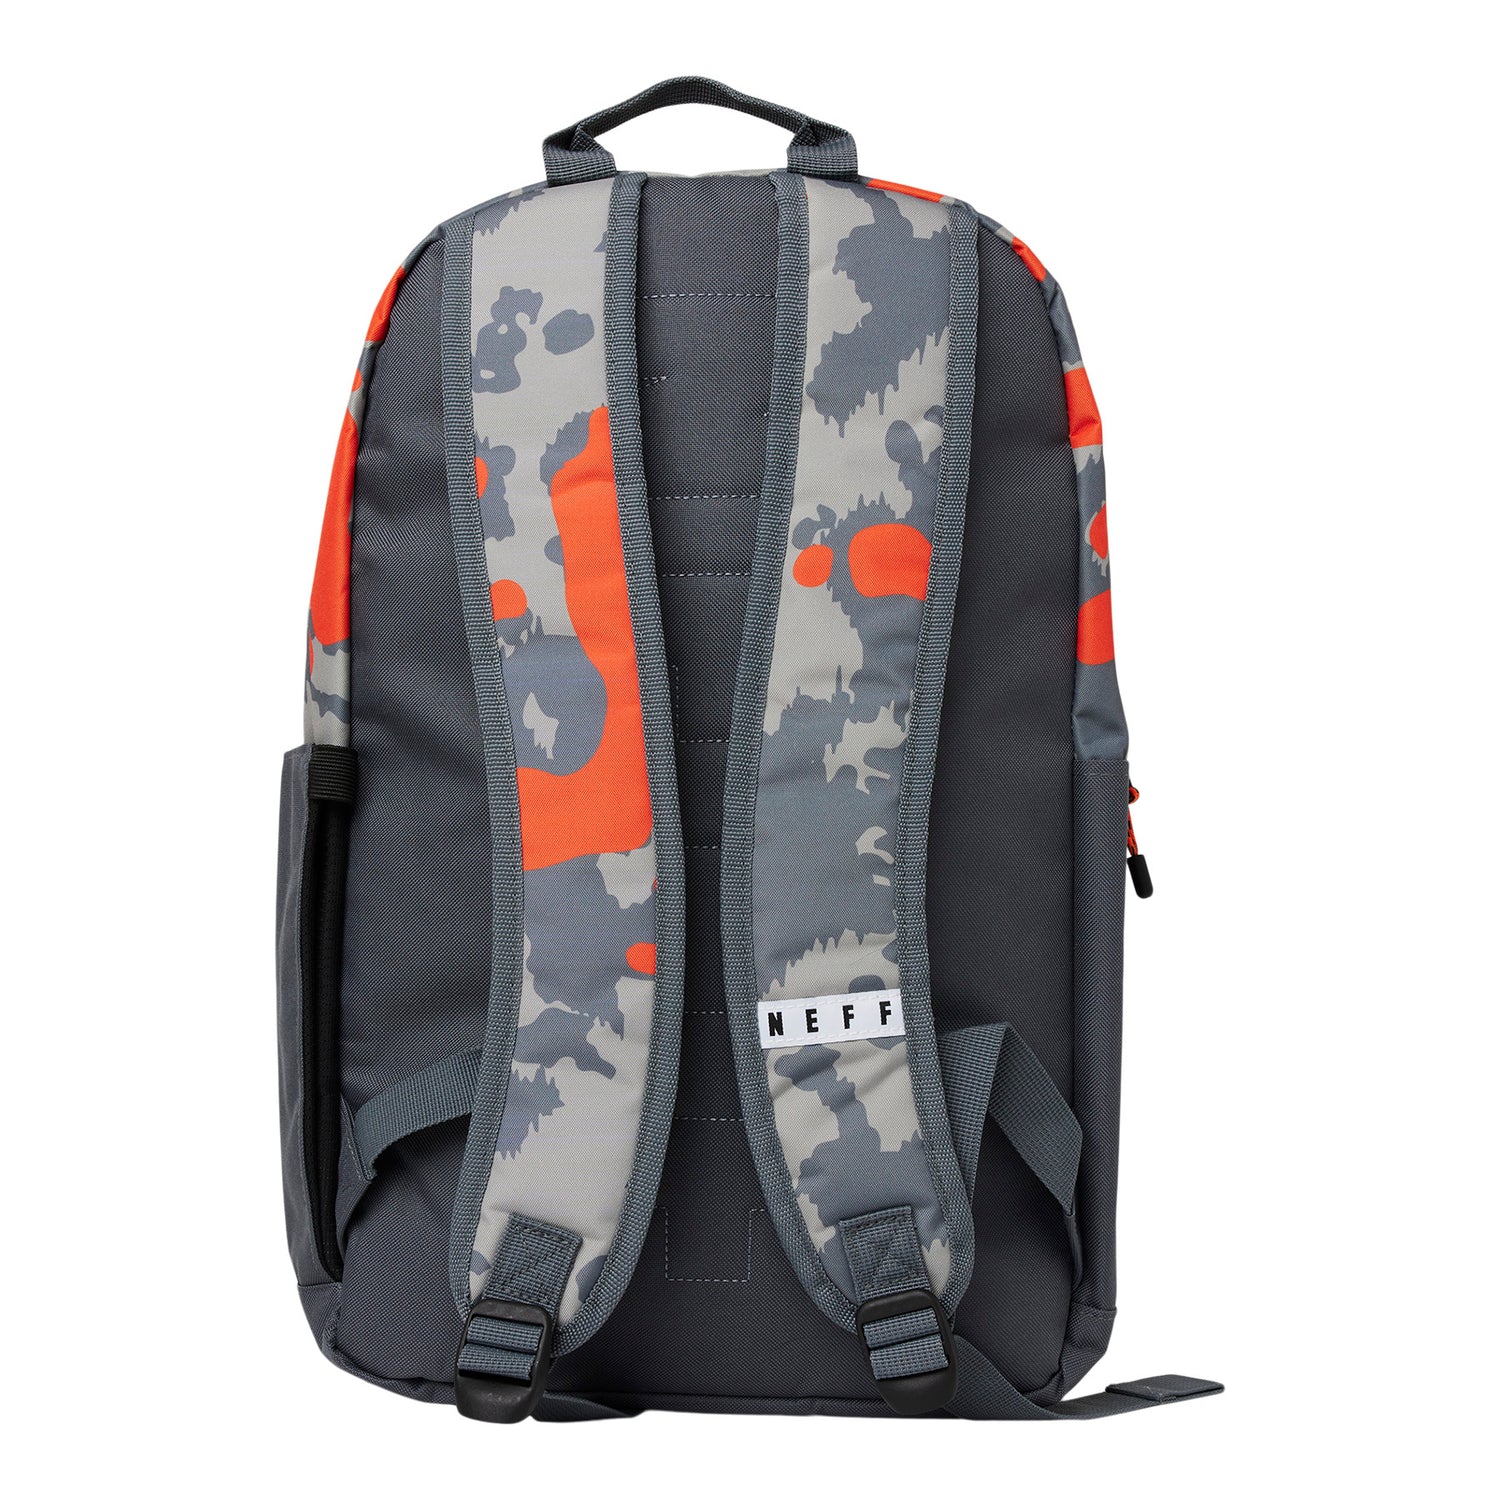 STRUCTURE BACKPACK - GREY